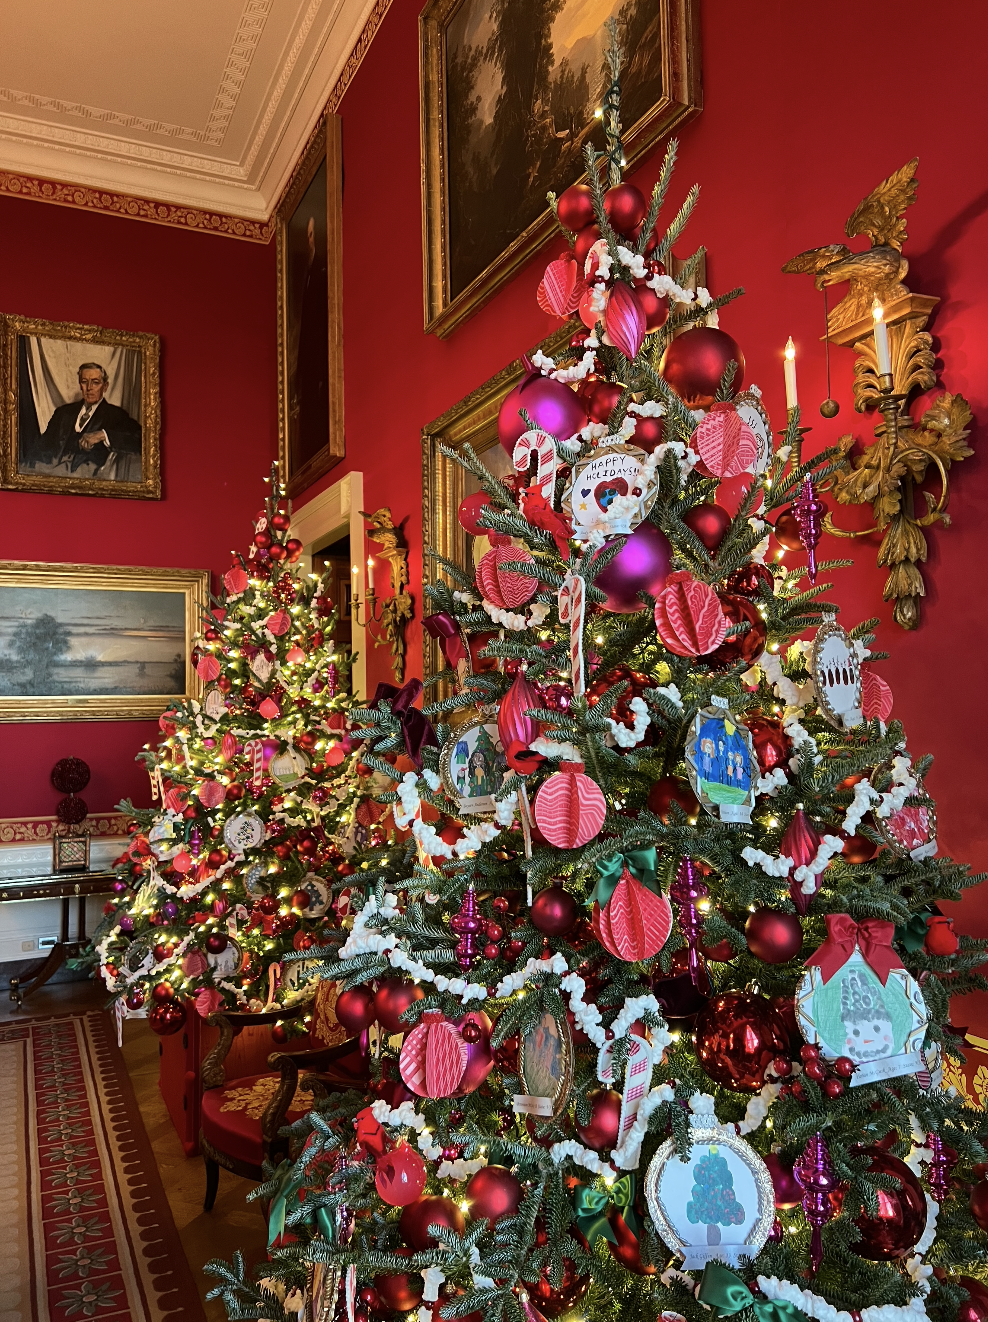 The Red Room at the White House with two Christmas trees decorated with lots of lights and ornaments. 